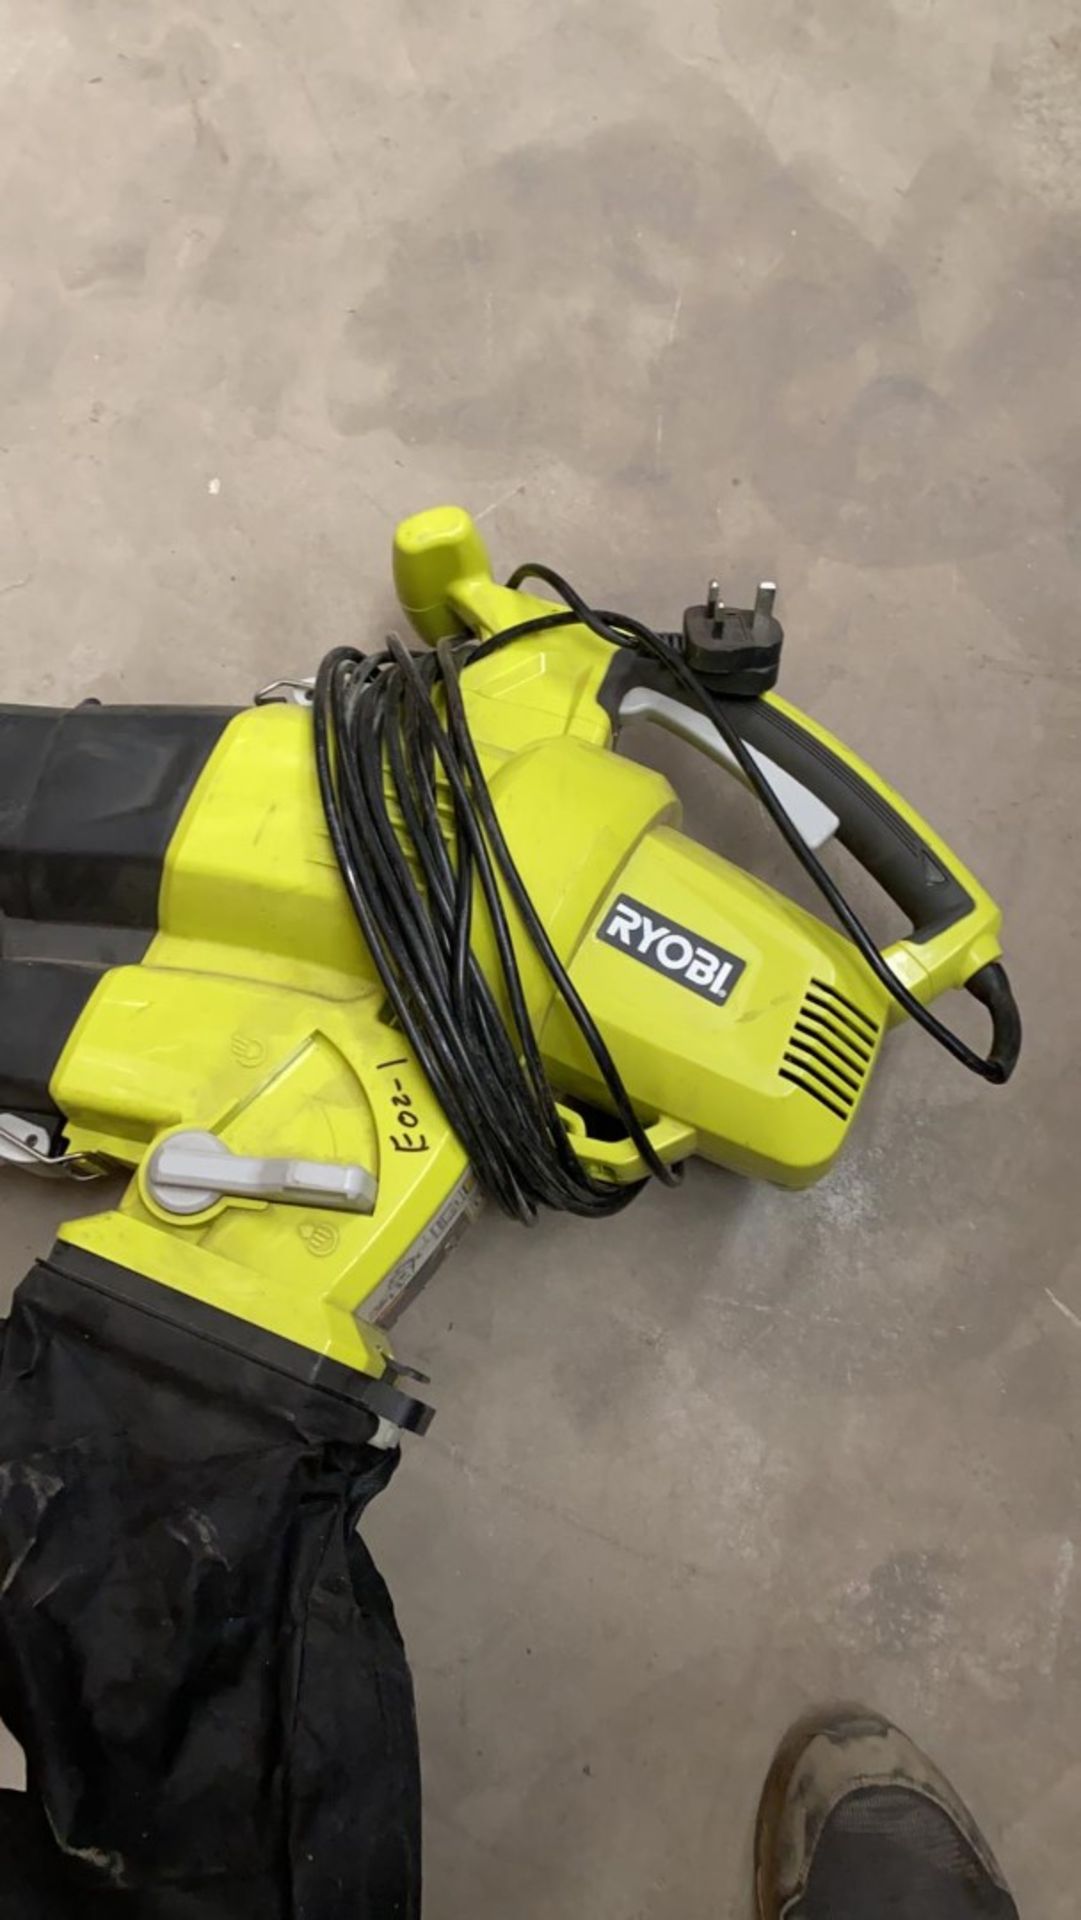 1 x Ryobi Electric Blower - Used, Recently Removed From A Working Site - CL505 - Ref: TL035 - - Image 4 of 4